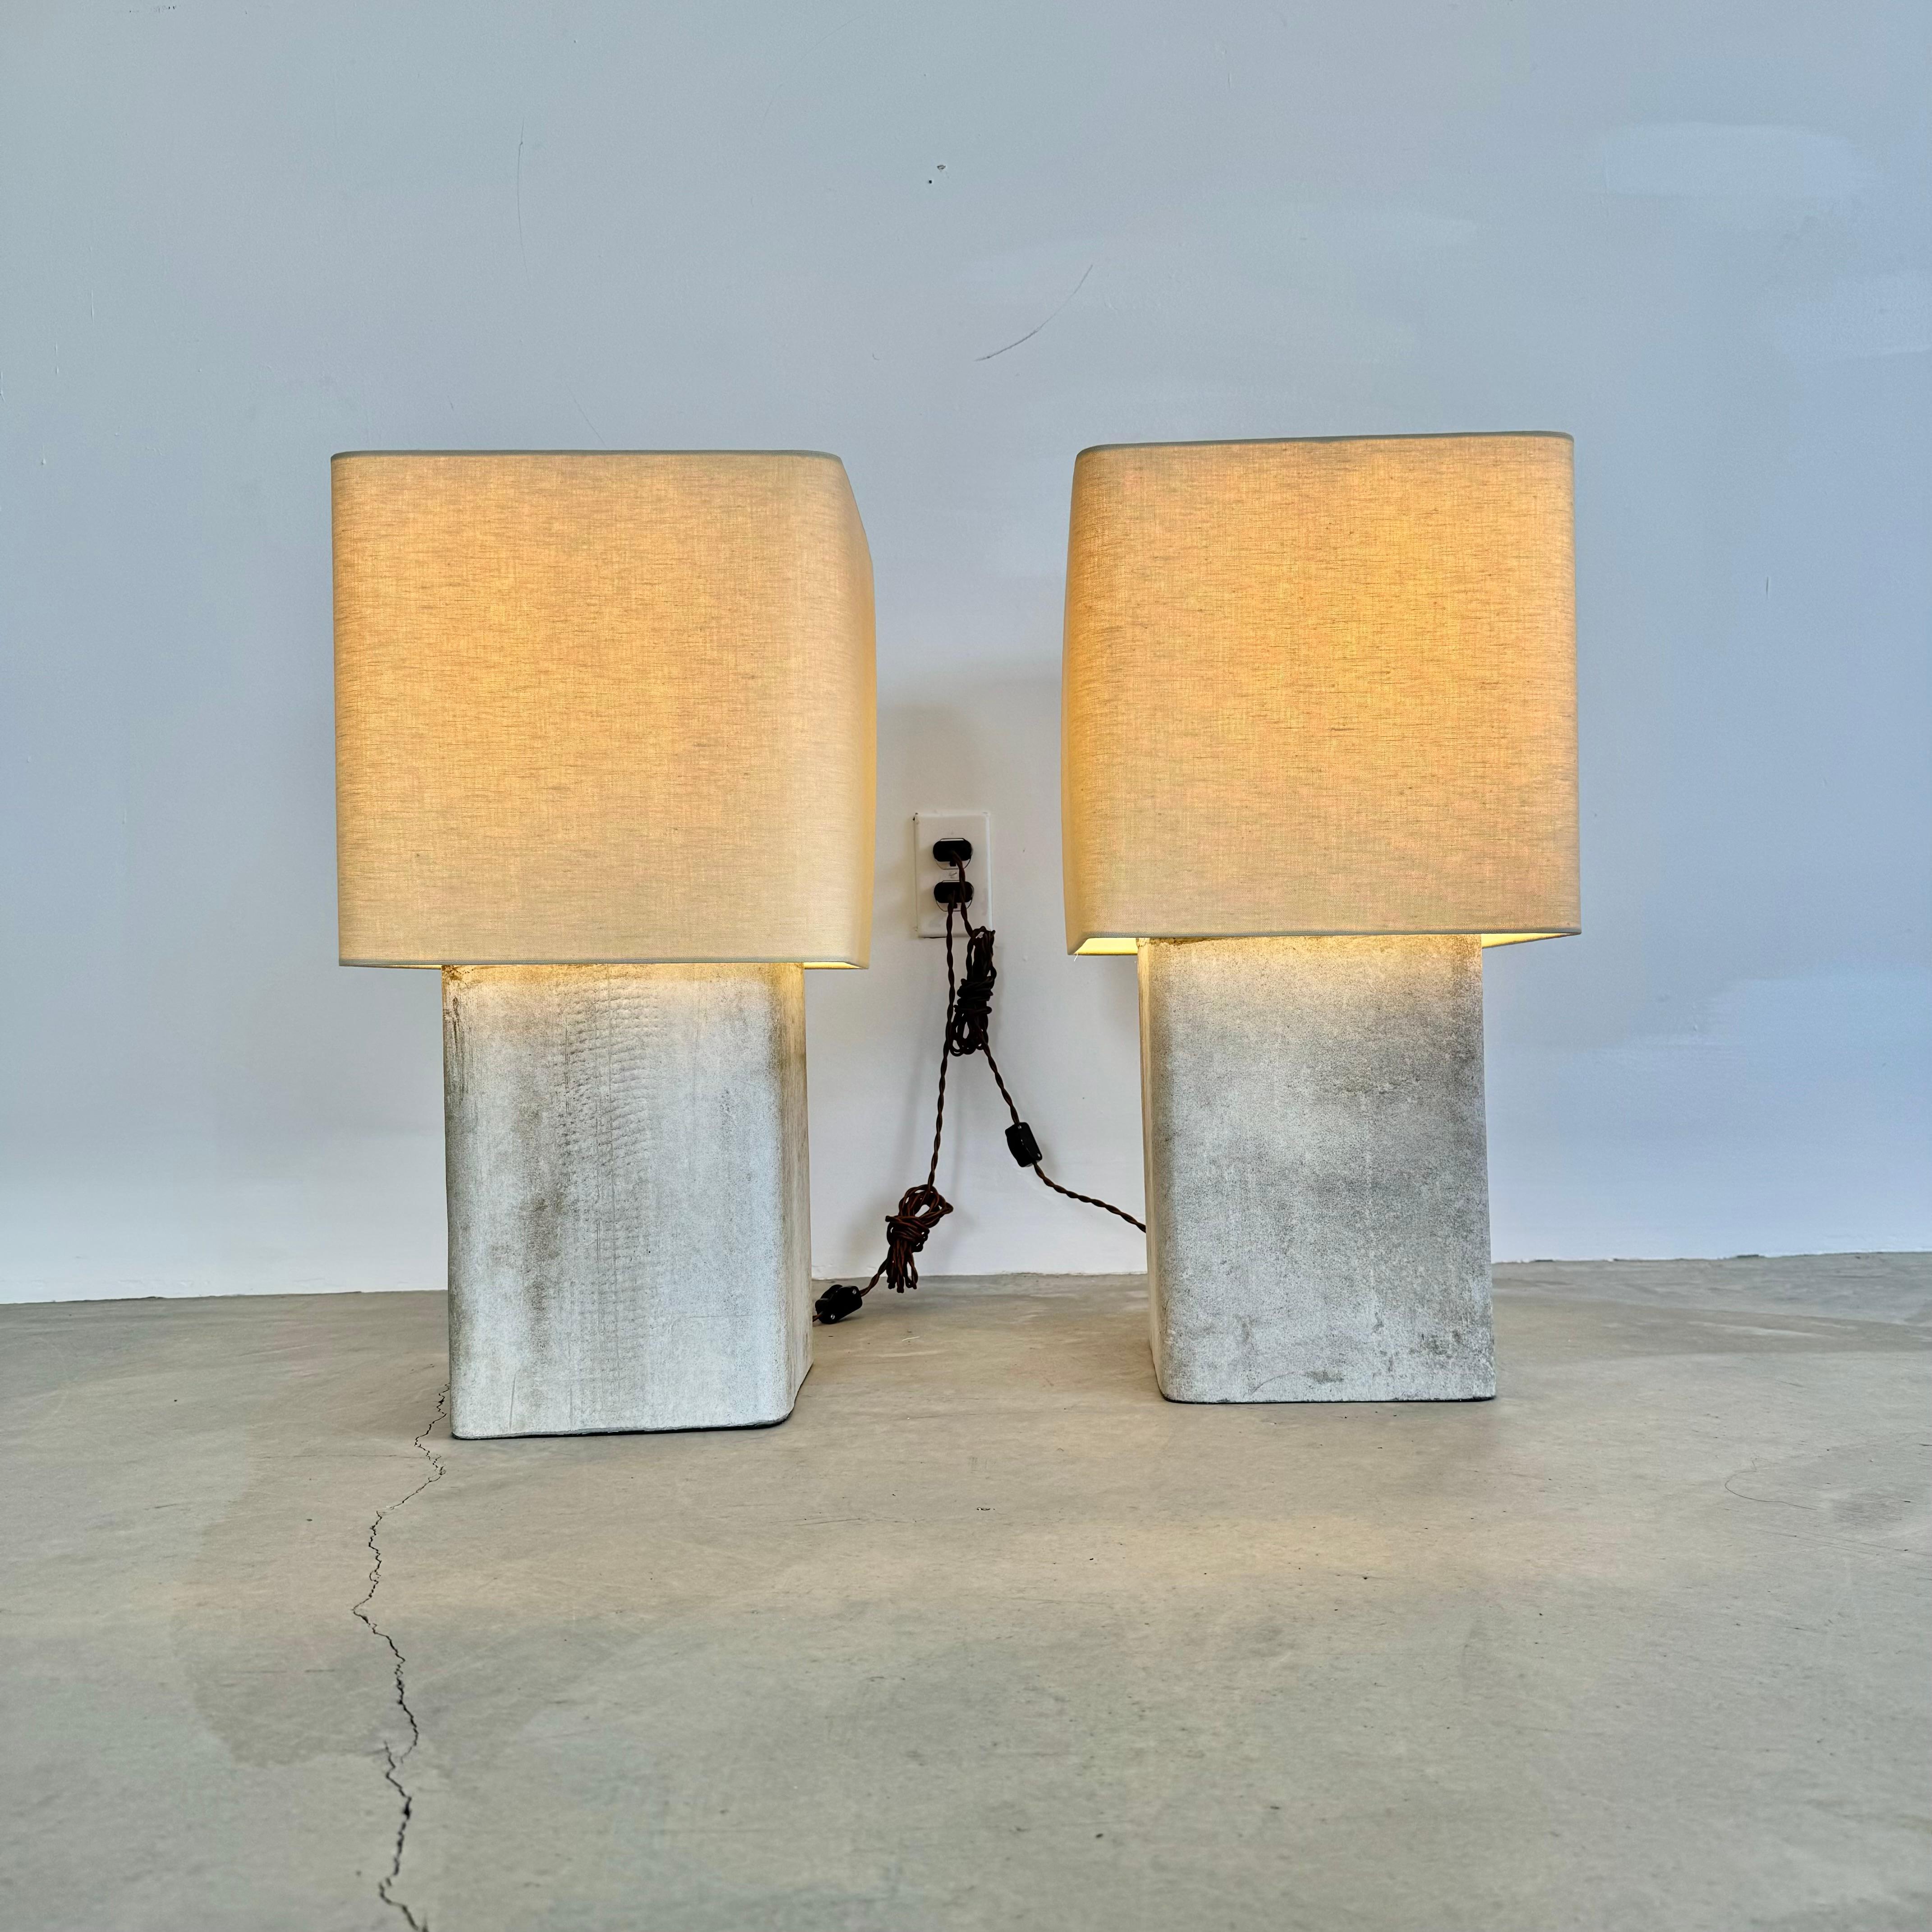 Stunning pair of large concrete Willy Guhl lamps by Eternit with teak top cover. Concrete made in Swizterland. Newly fitted as a lamp, re-wired with a new custom linen shade and light diffusor on top. Stunning simplicity and beautiful texture make